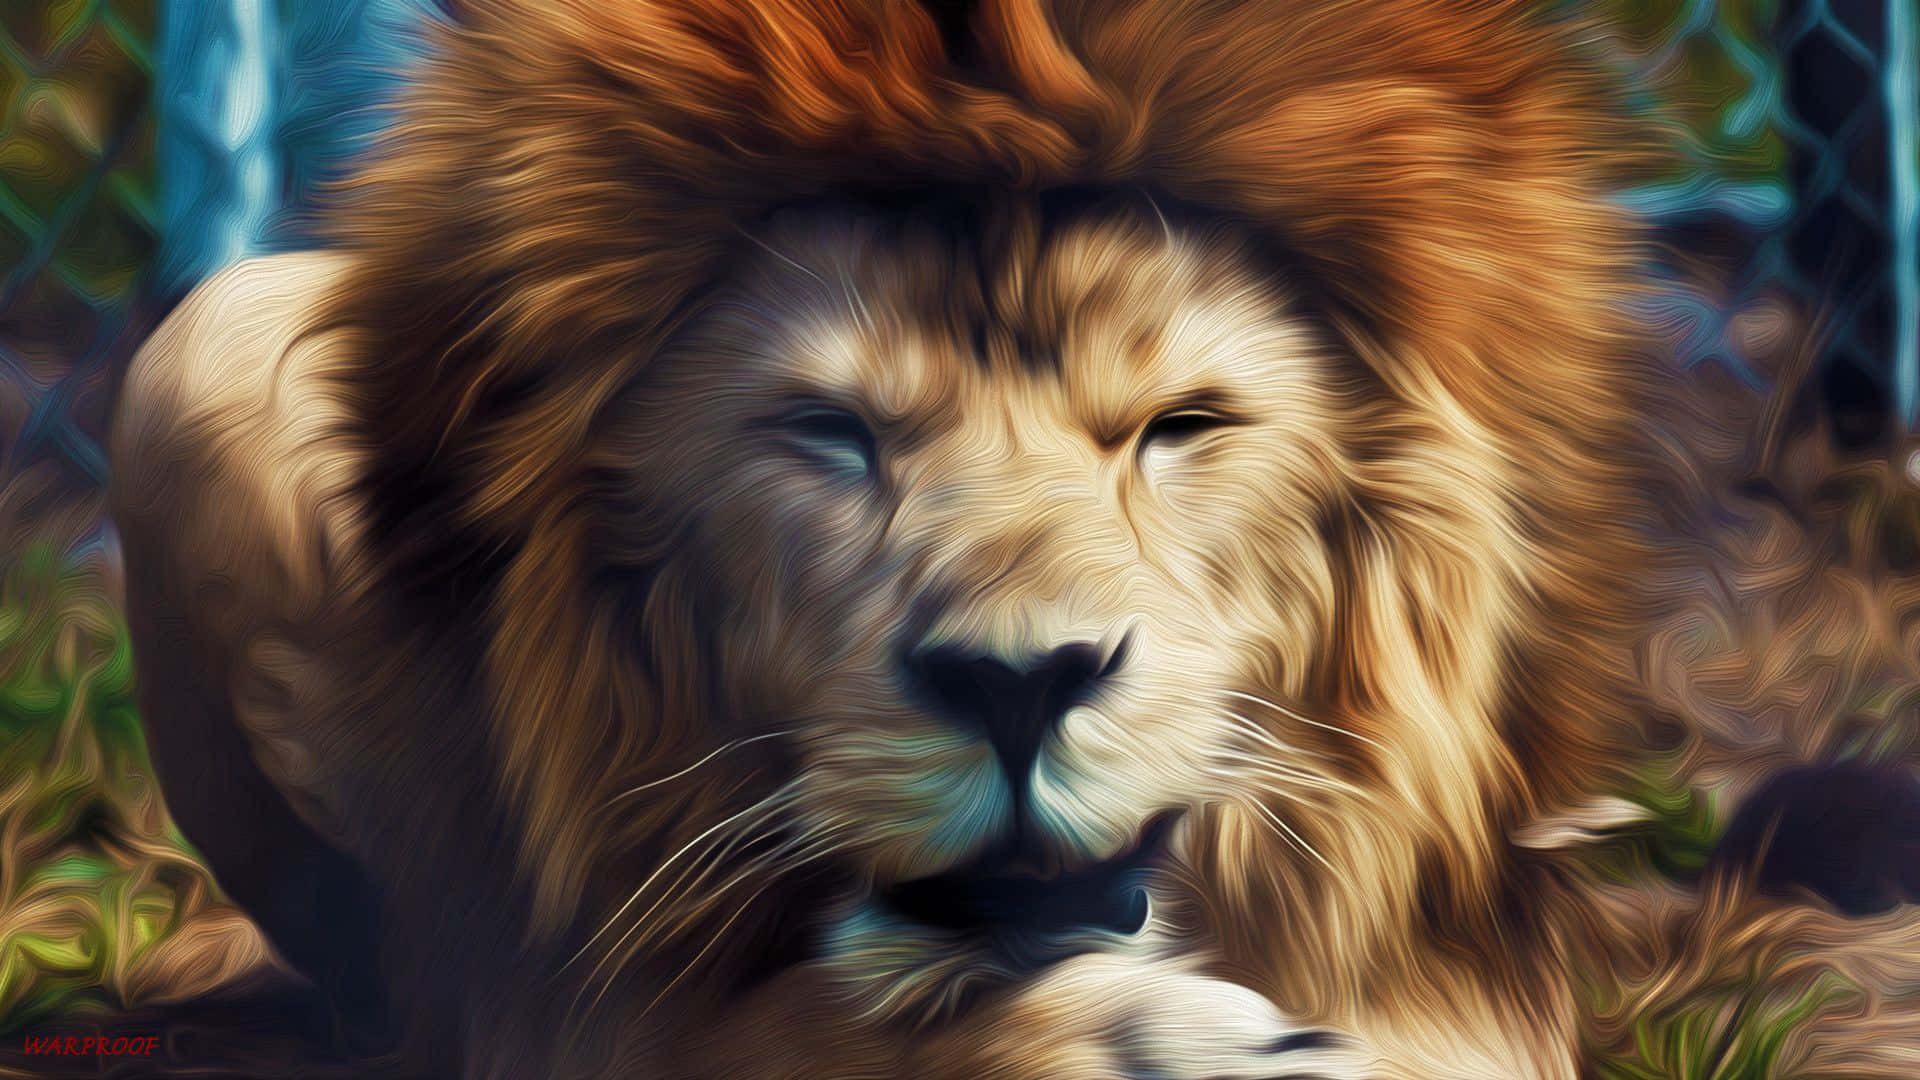 A roaring abstract lion Wallpaper